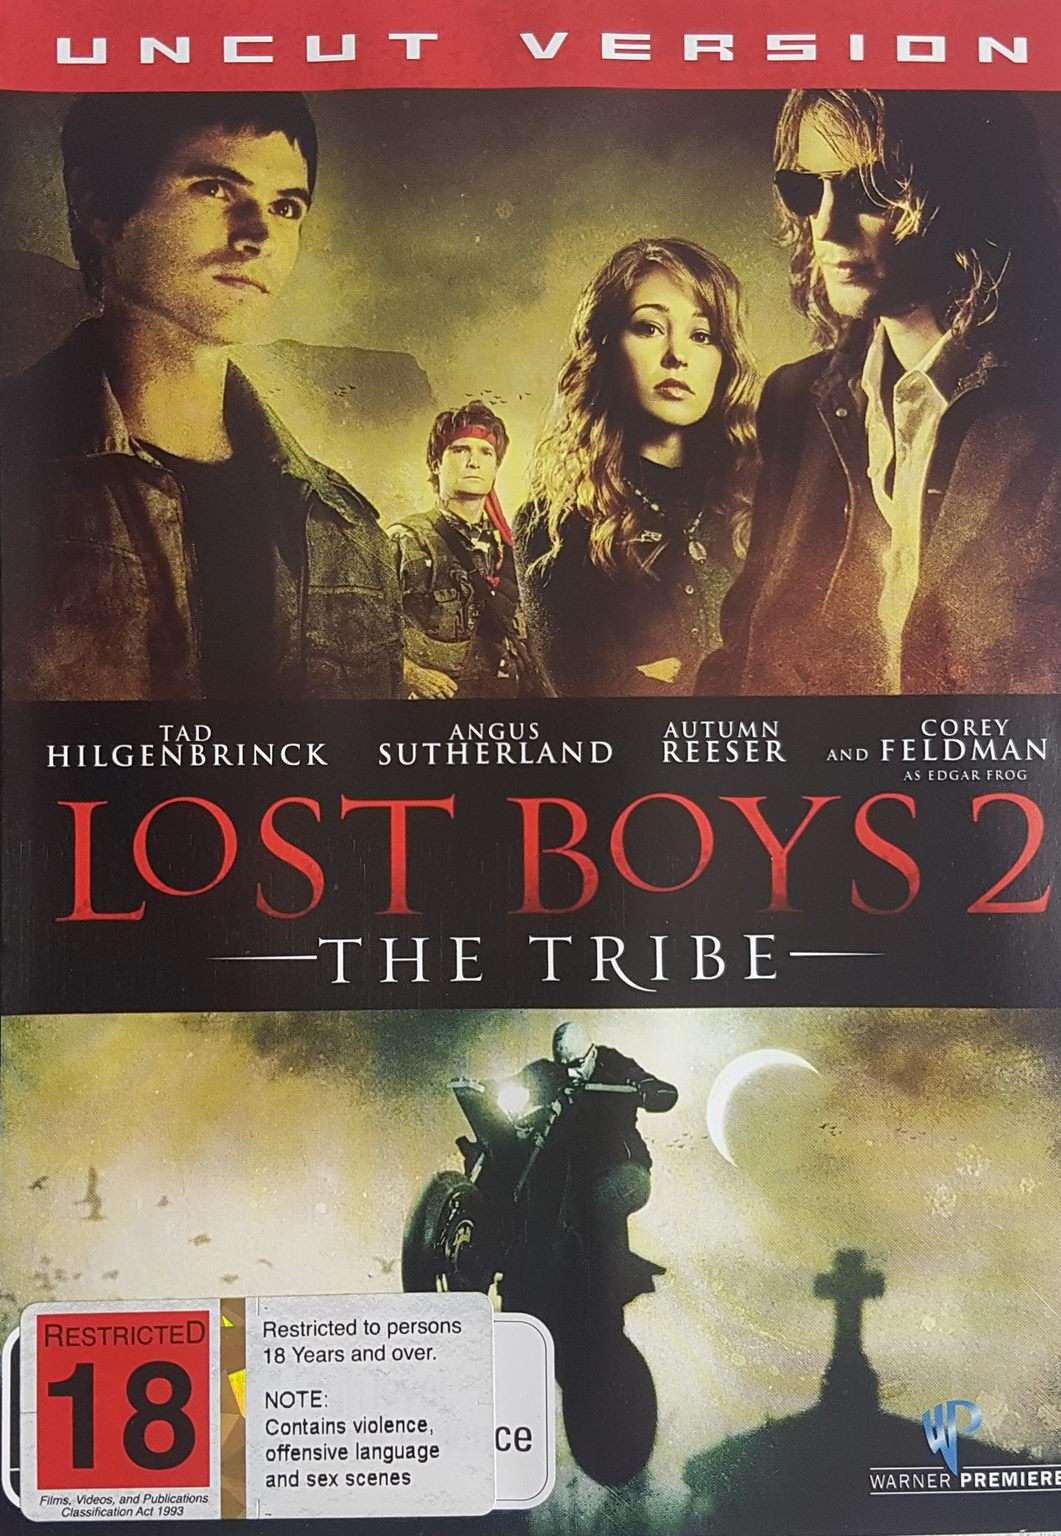 The Lost Boys 2 - The Tribe